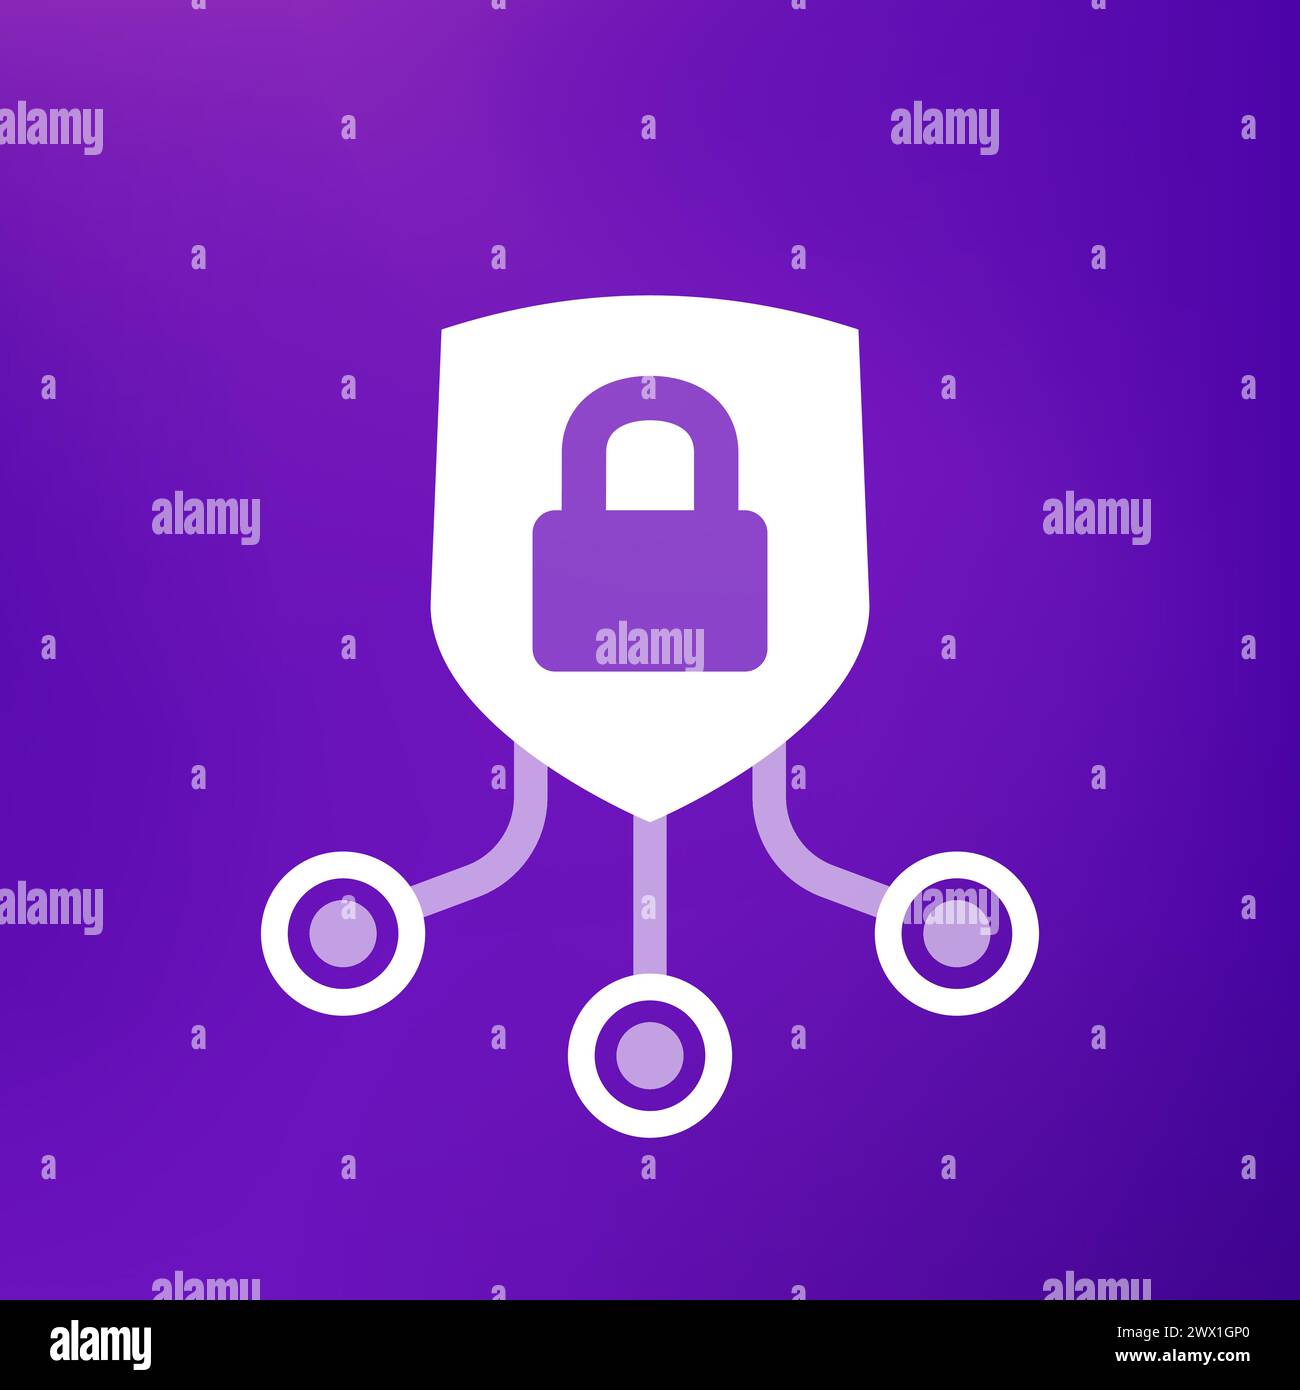 cyber security vector icon for apps Stock Vector